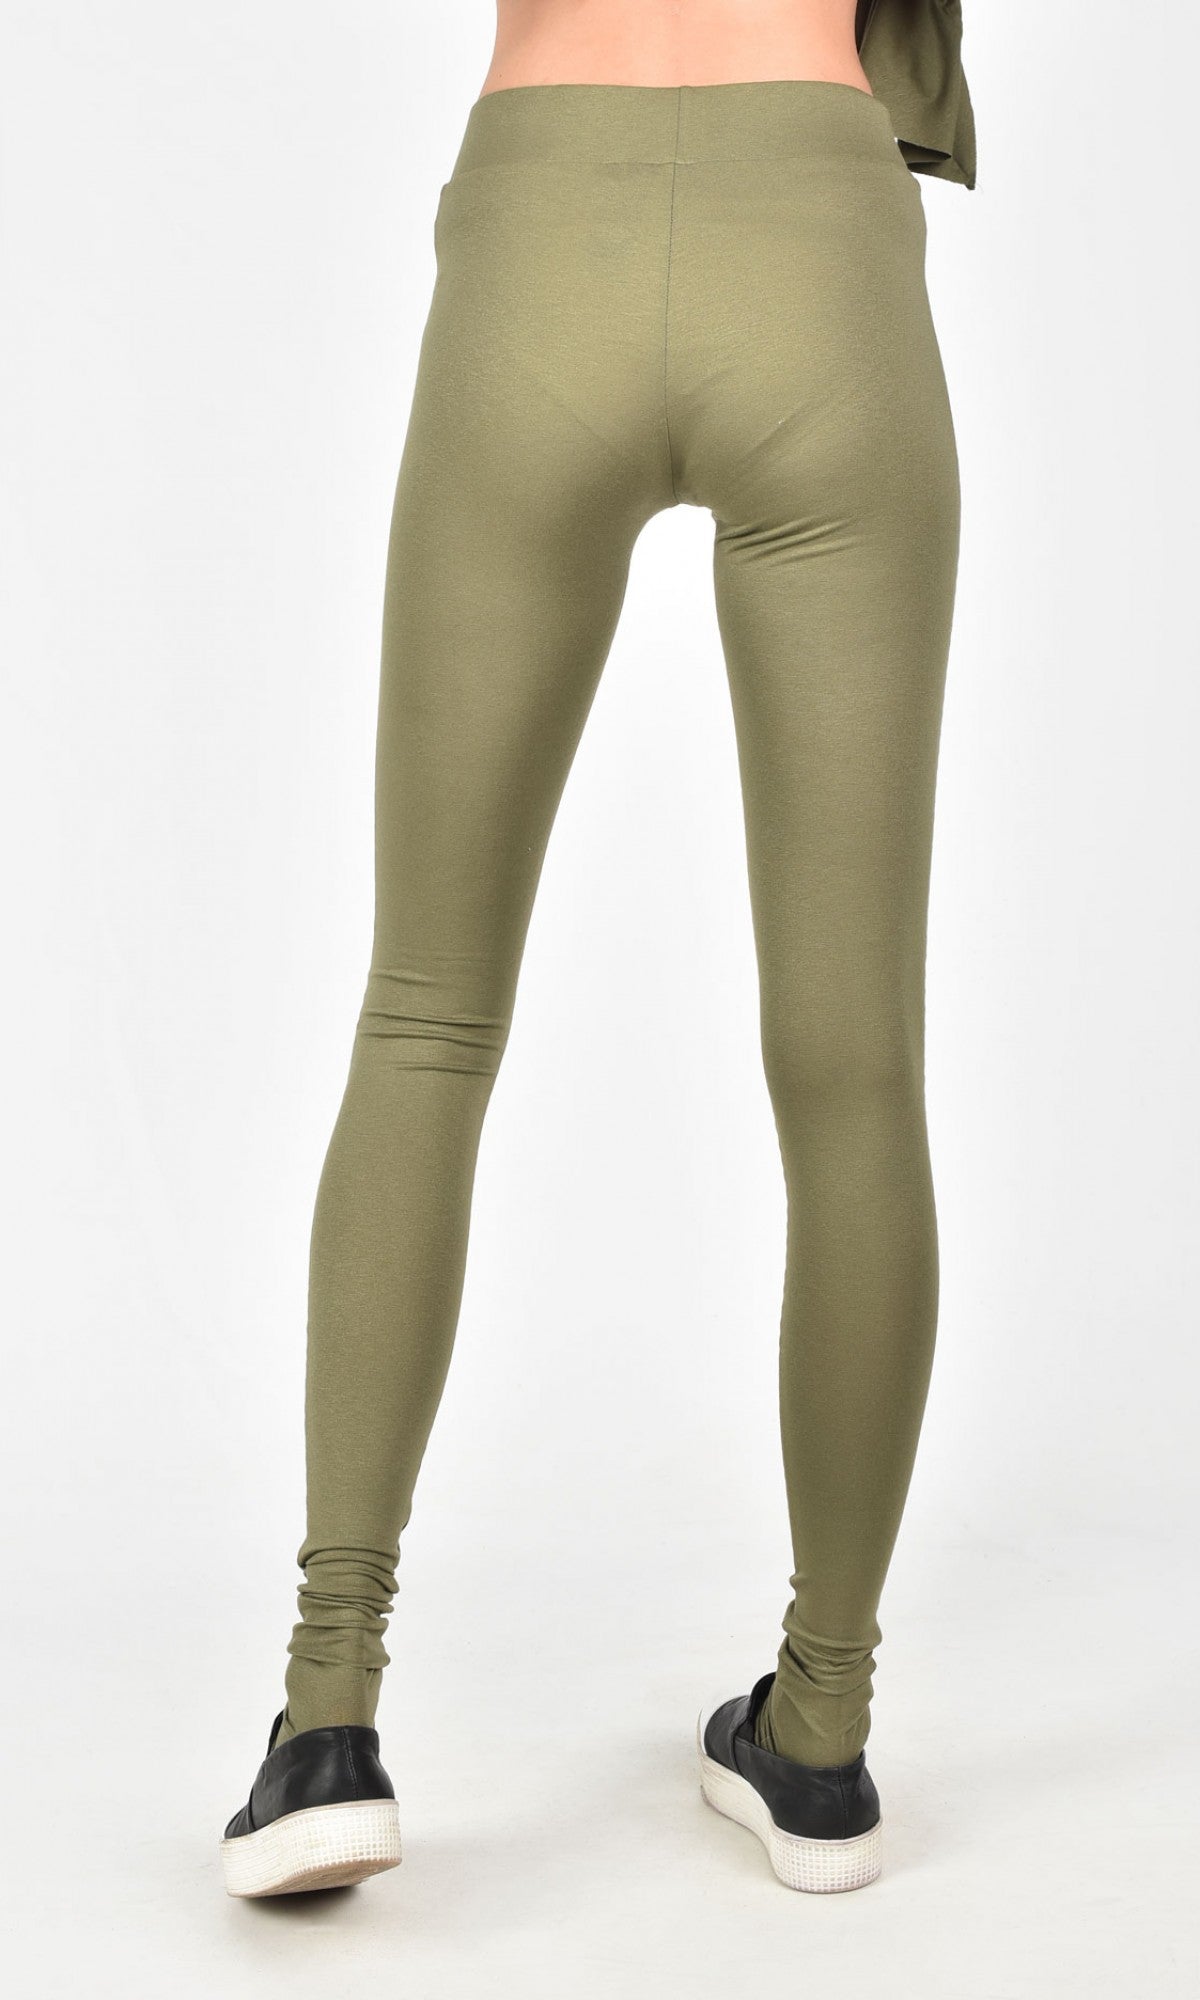 Extra Long Leggings with a Pin Tuck Pattern